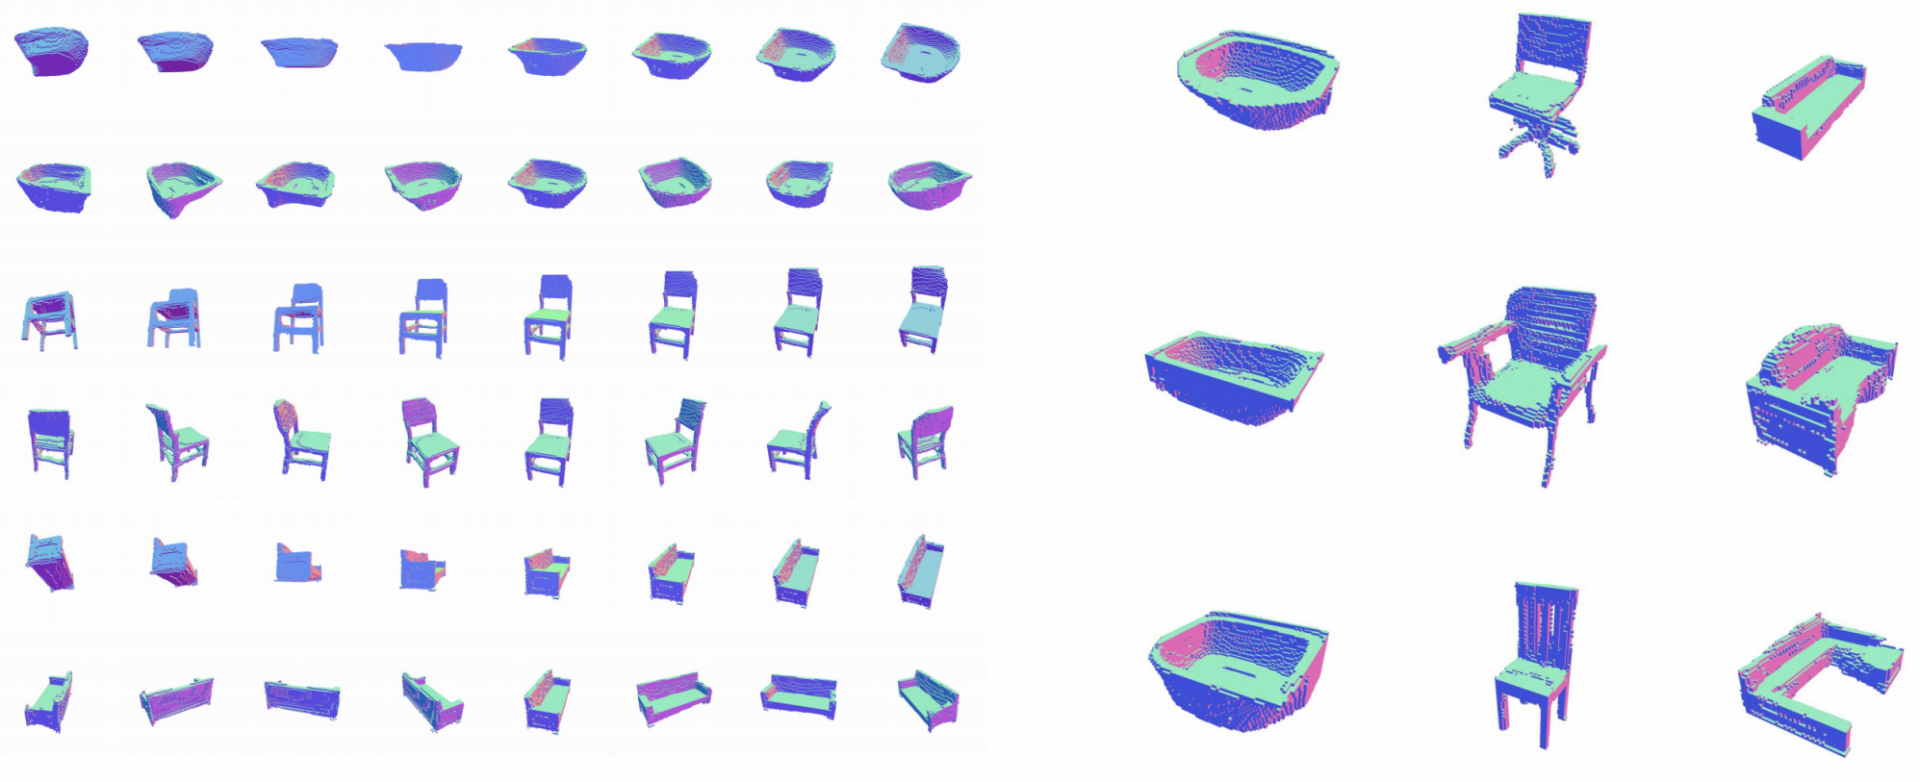 Many small 3D models of chairs couches and tubs from different view points created by Inverse Graphics GAN